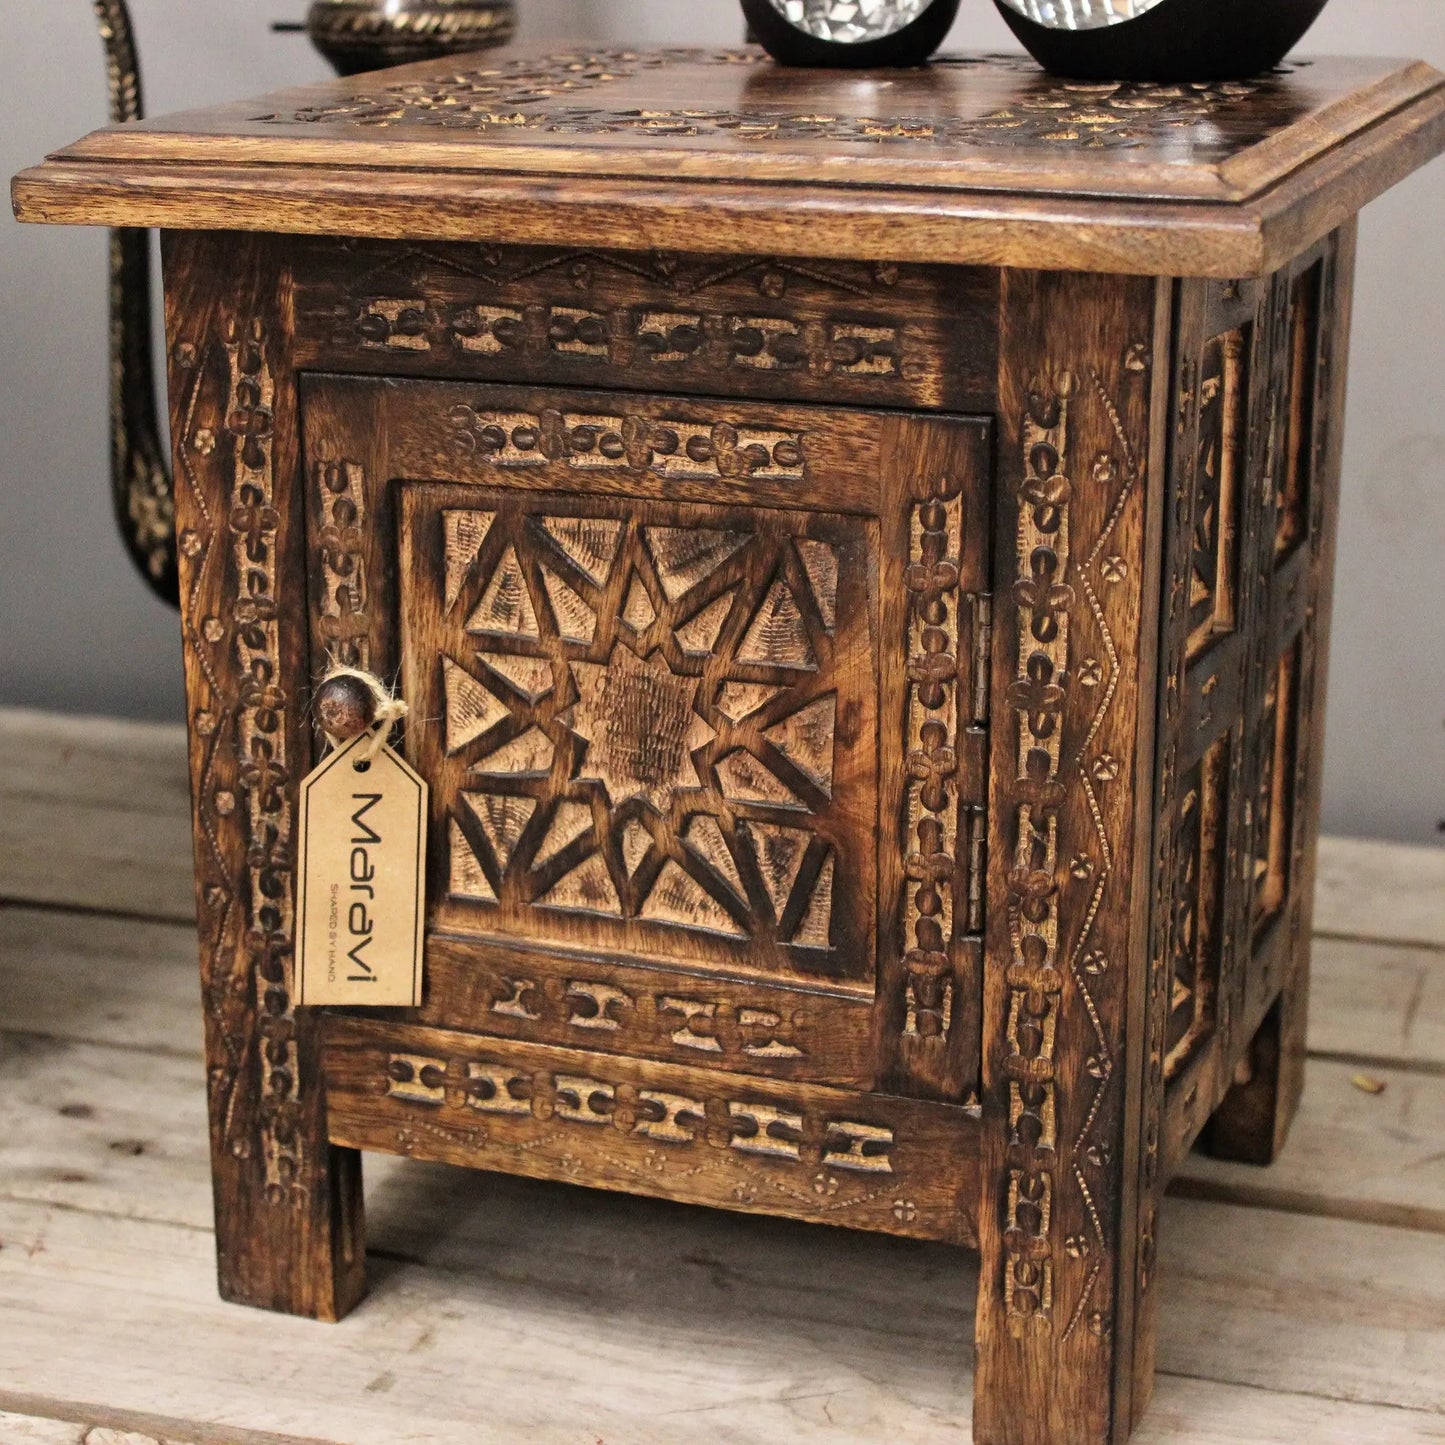 Rupicola Small Square Side Tables Moroccan Style Set of 2